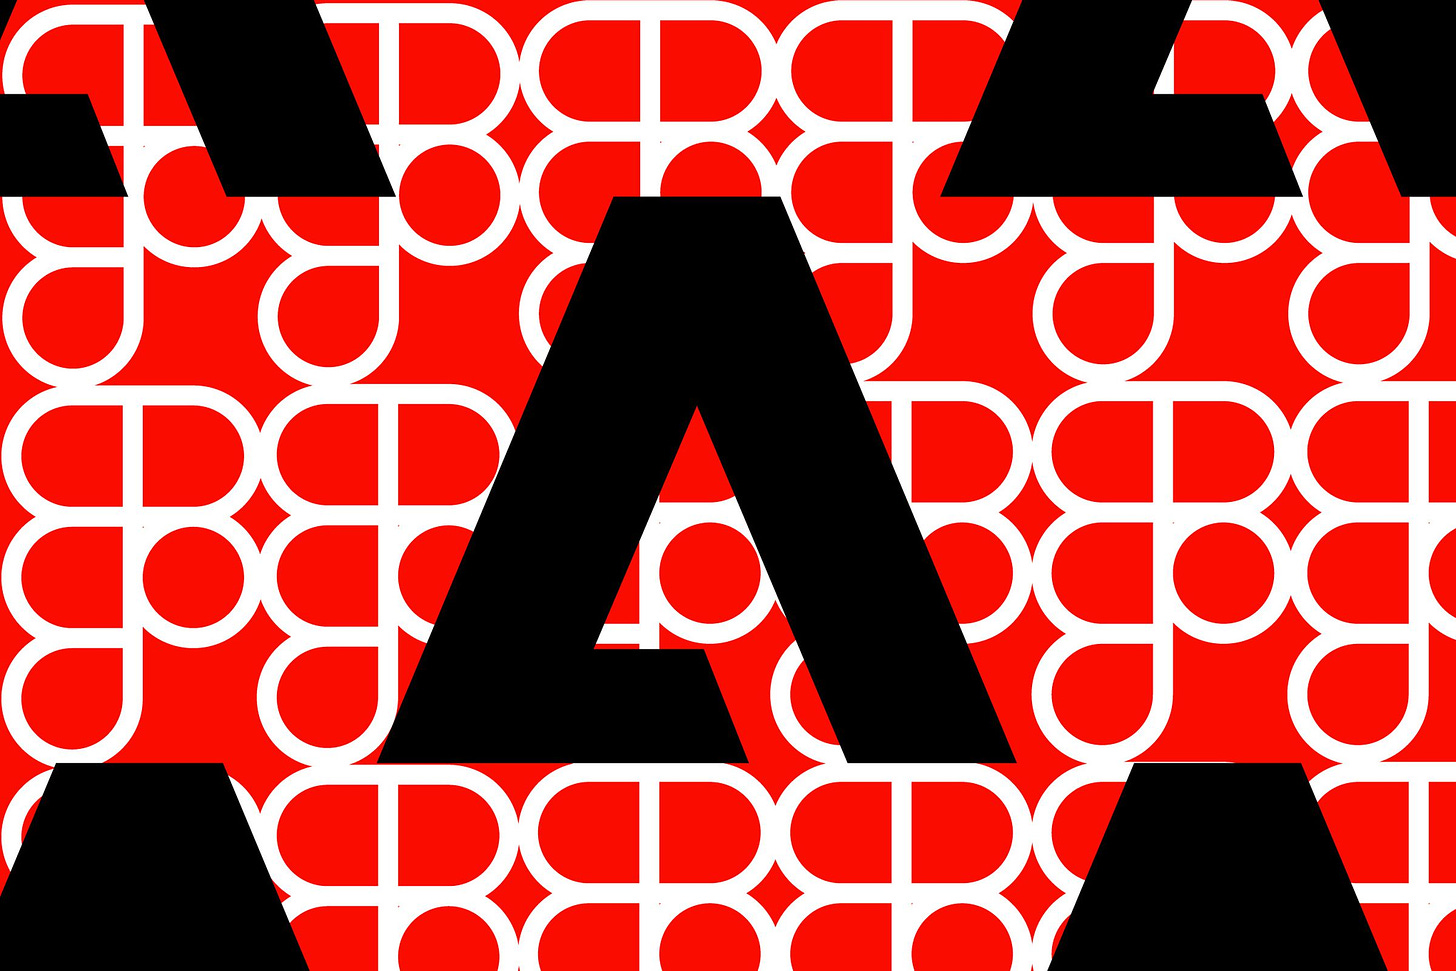 An illustration containing black Adobe logos in front of white Figma logos on a red background.